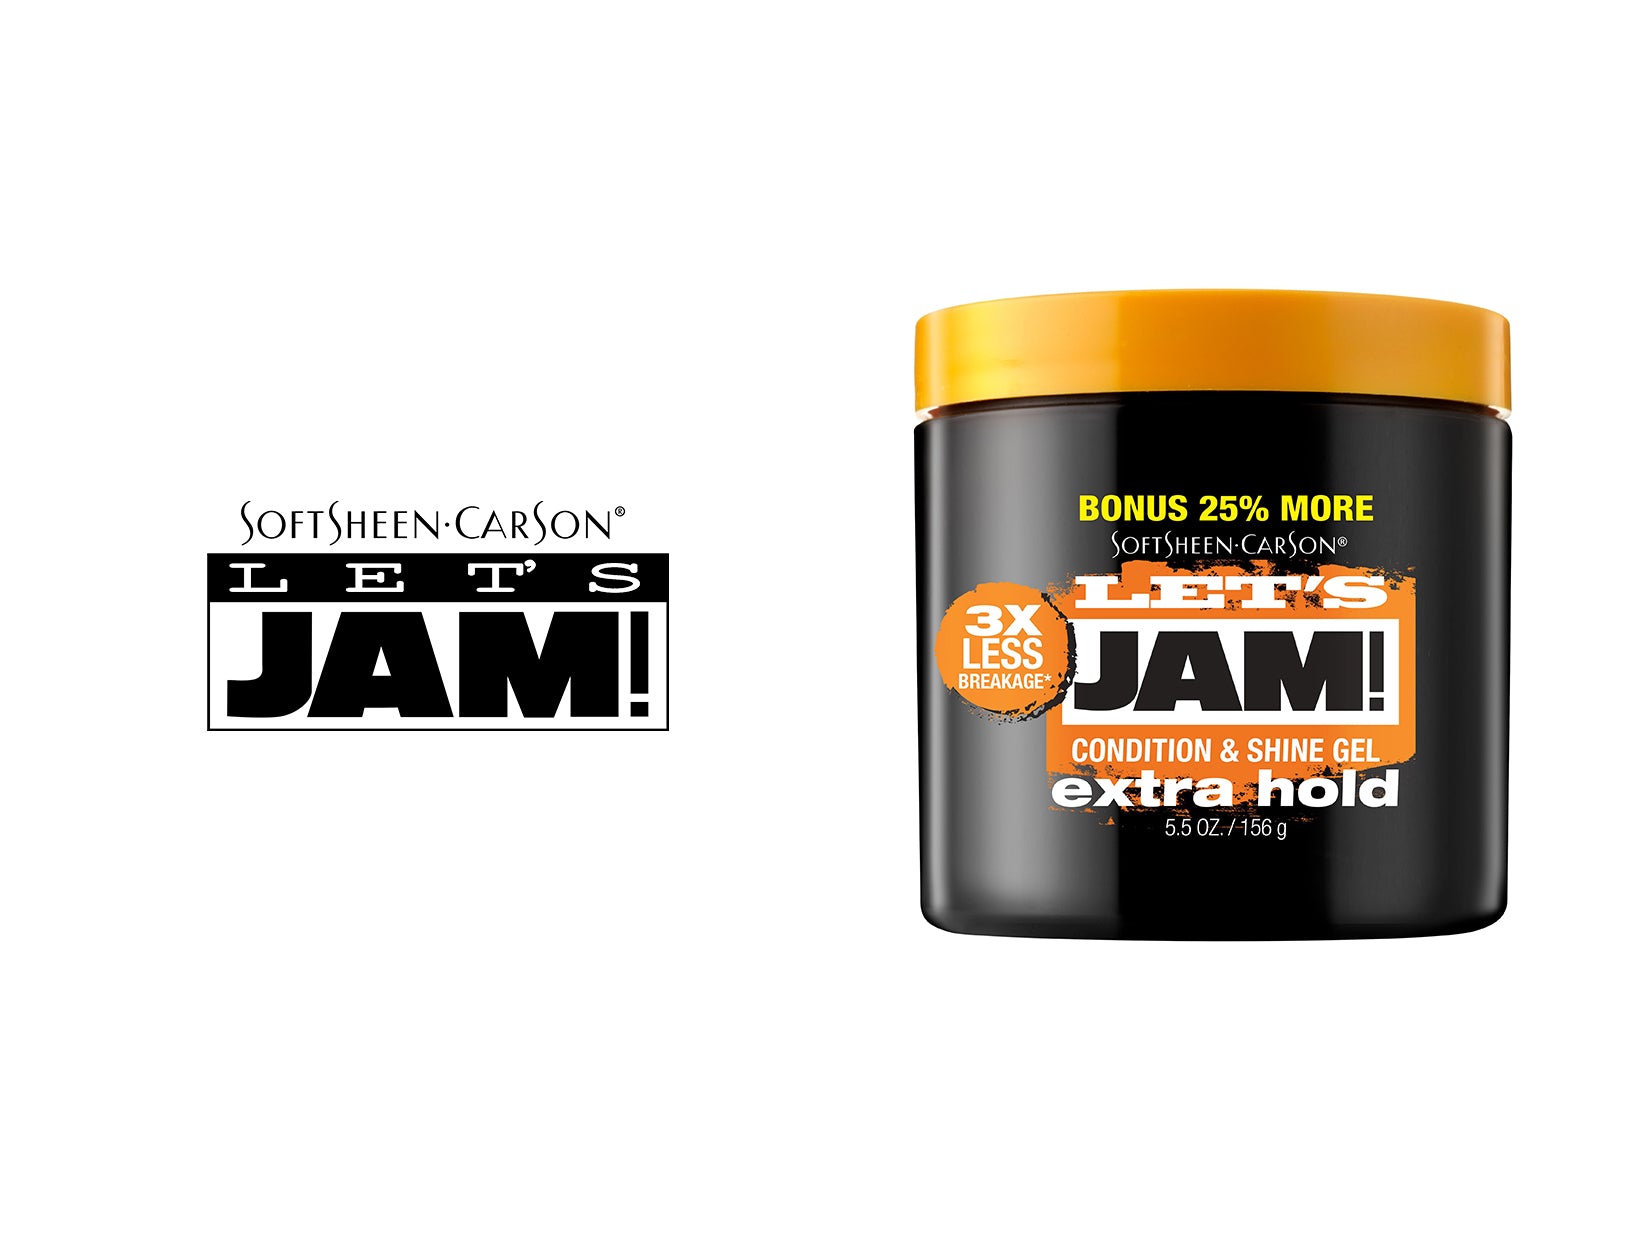 LET'S JAM CONDITION & SHINE  GEL EXTRA HOLD